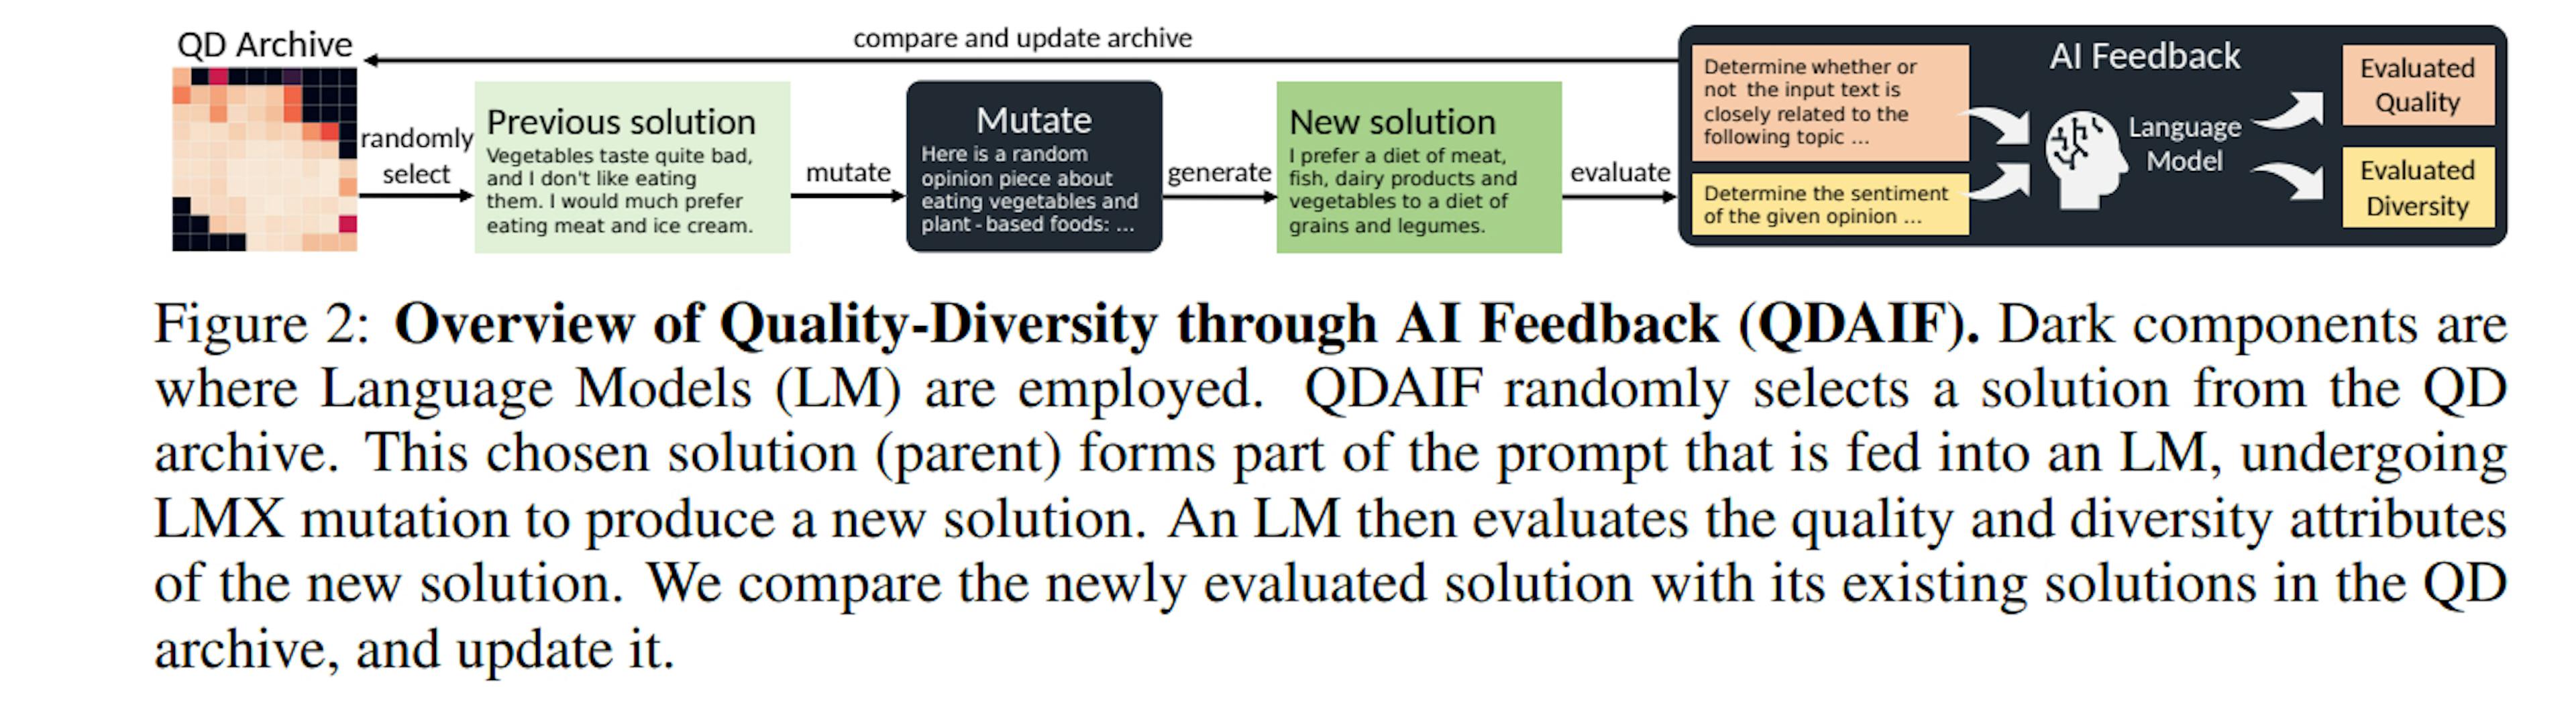 featured image - Quality-Diversity through AI Feedback: Background and Related Work